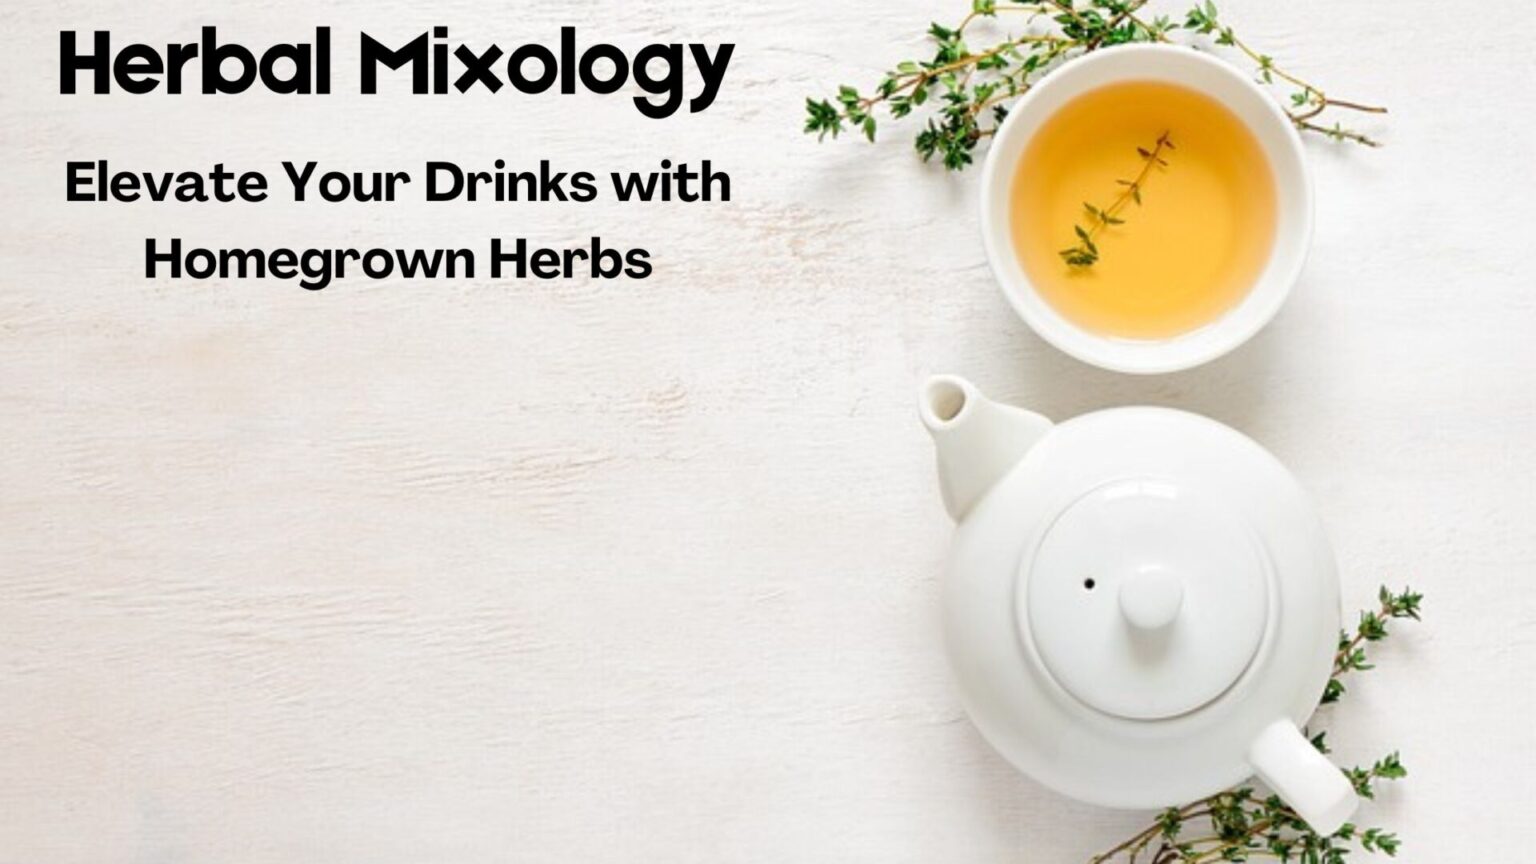 Herbal Mixology: Elevate Your Drinks with Homegrown Herbs